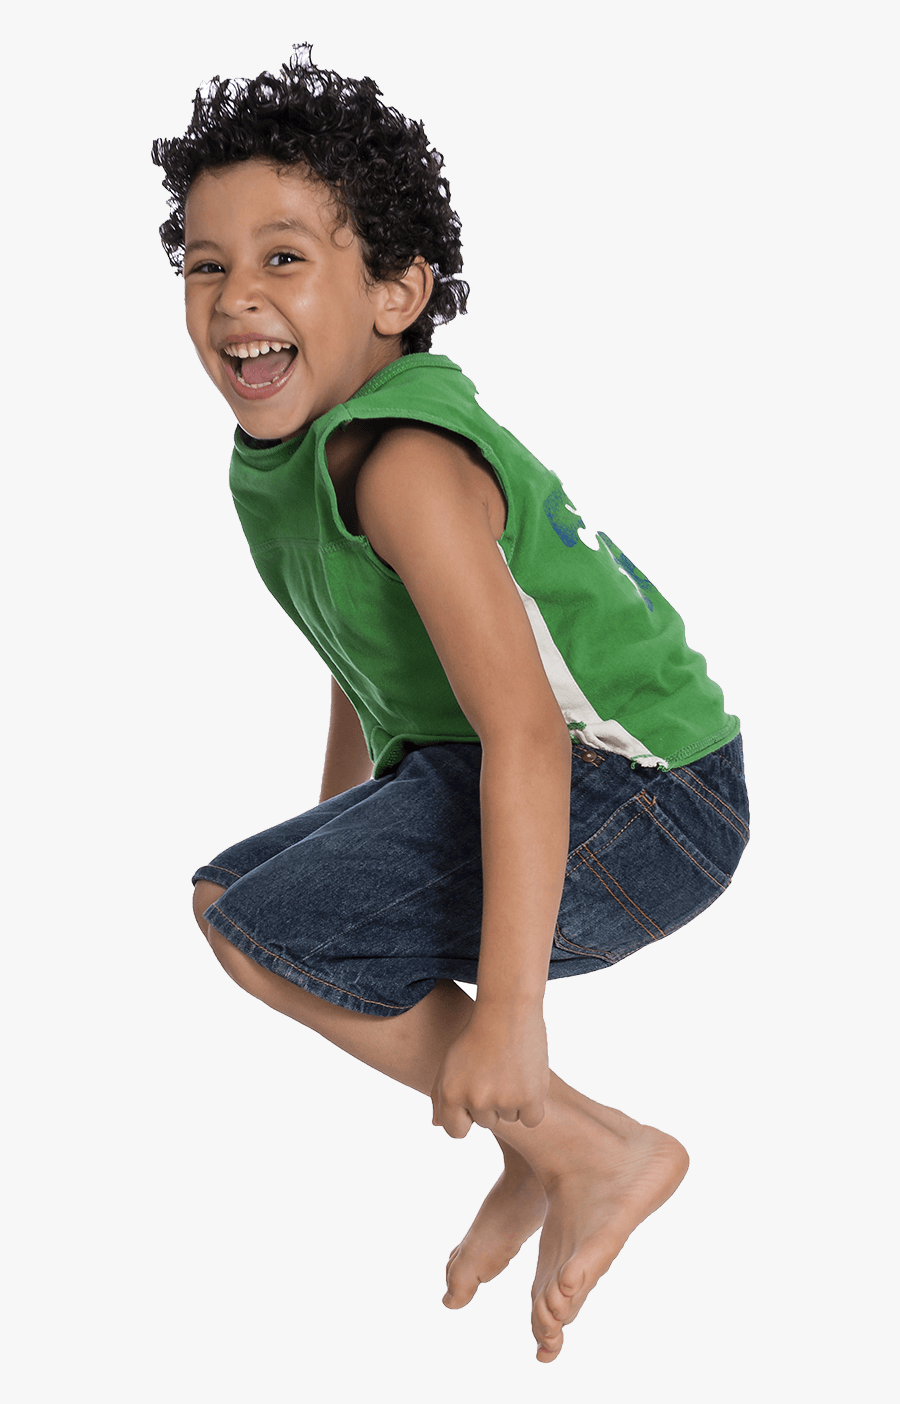 Sitting Child Png - Child Sitting Png, Transparent Clipart